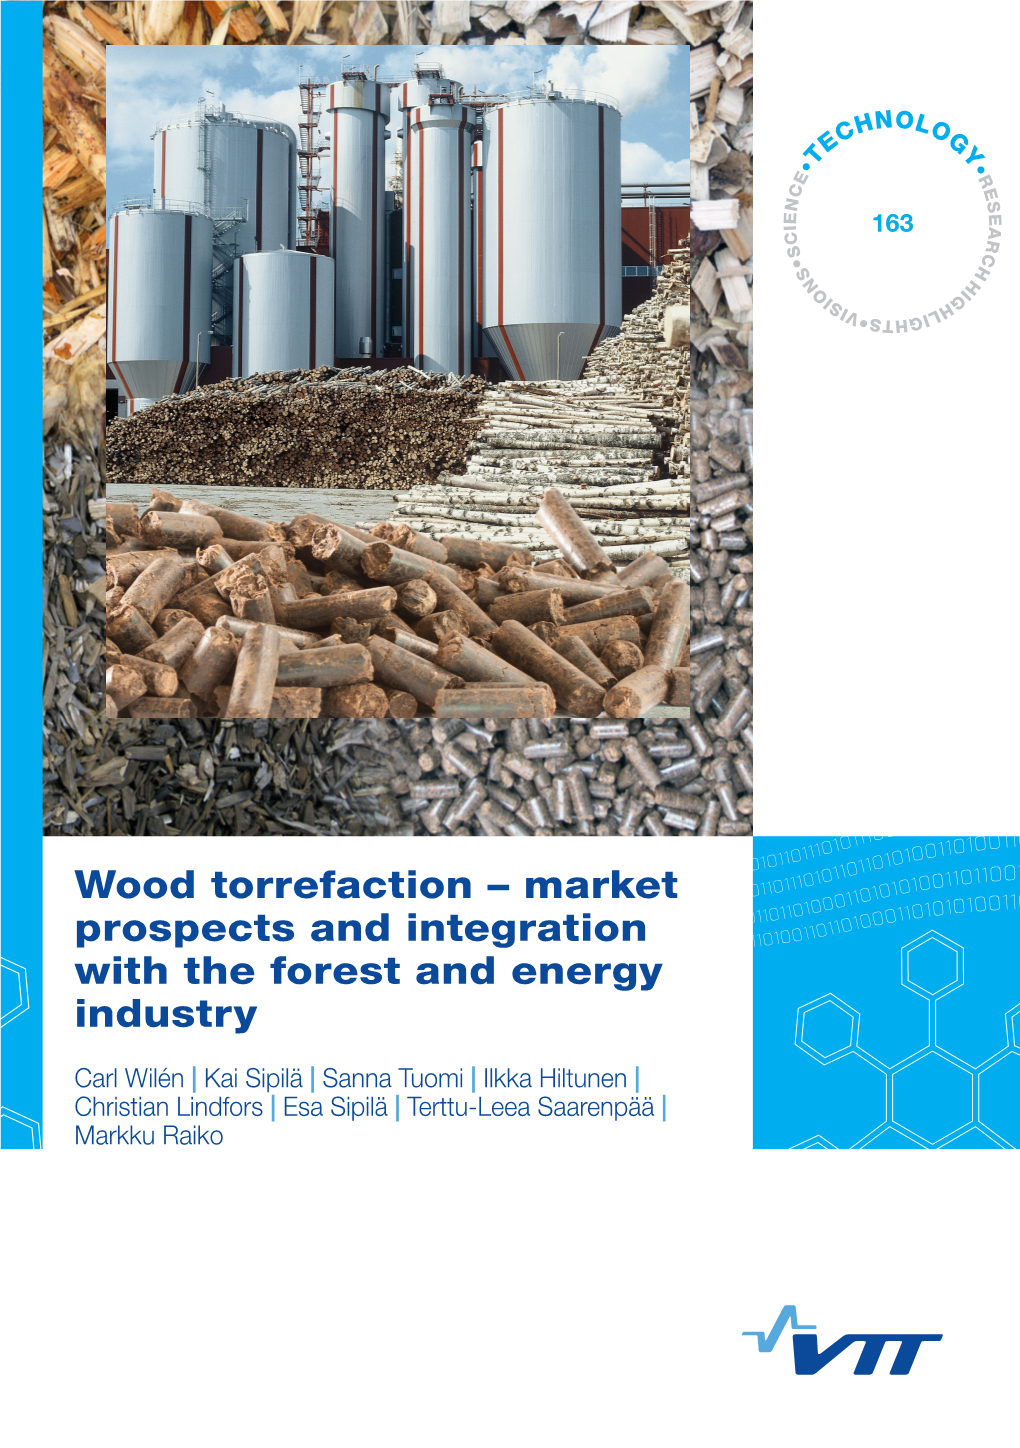 Wood Torrefaction – Market Prospects and Integration with the Forest and Energy Industry